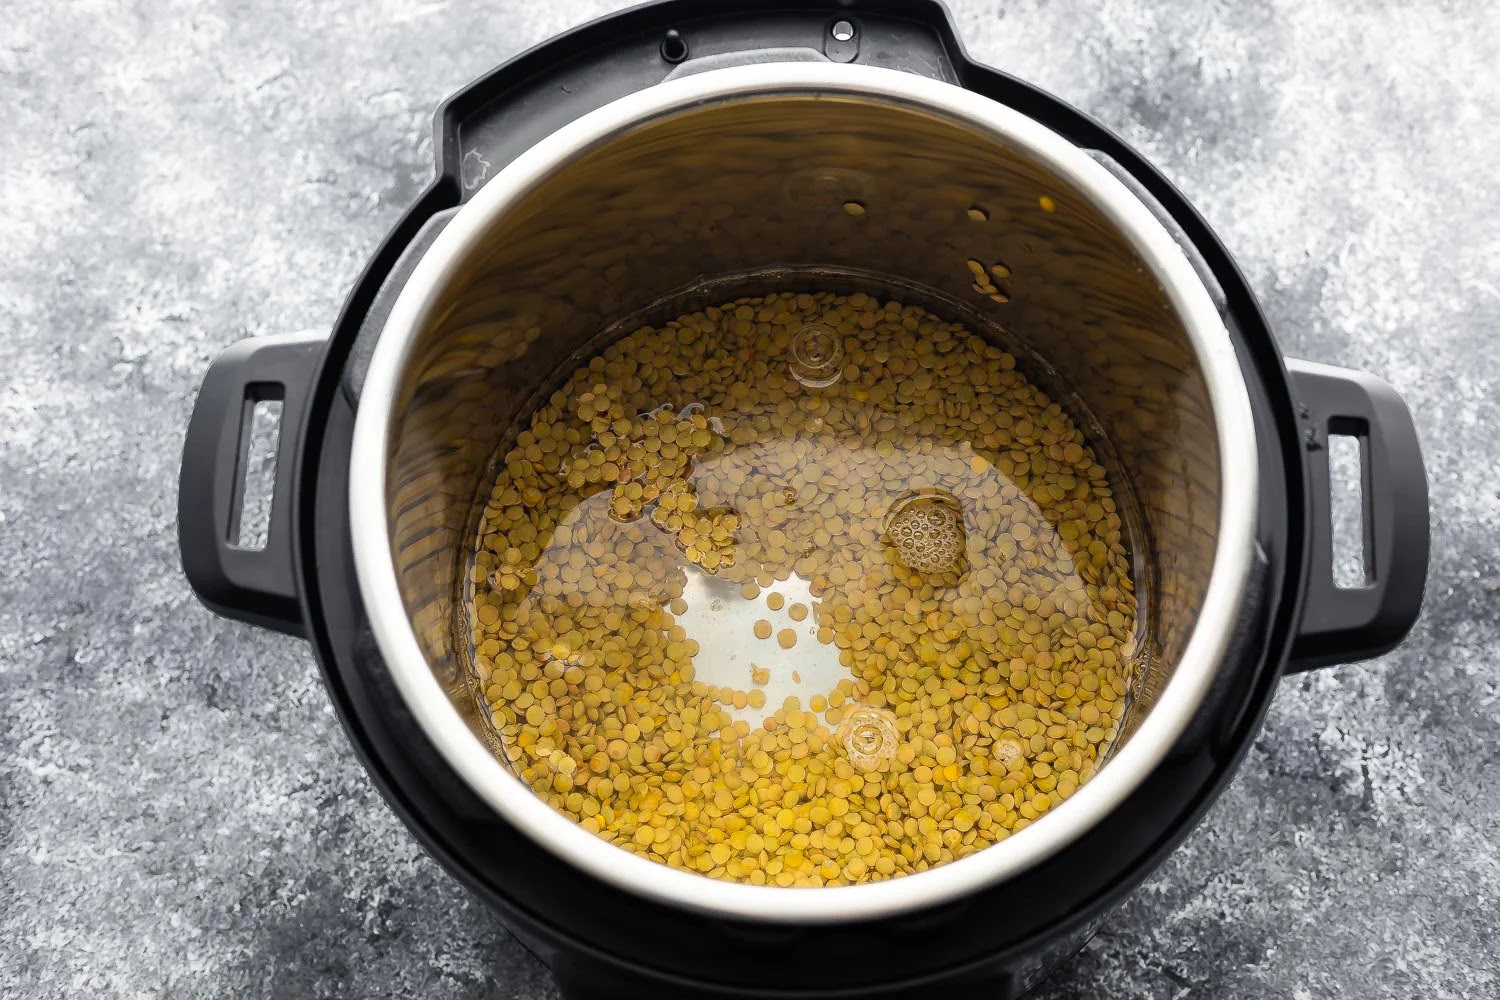 How Long To Cook Lentils In An Electric Pressure Cooker